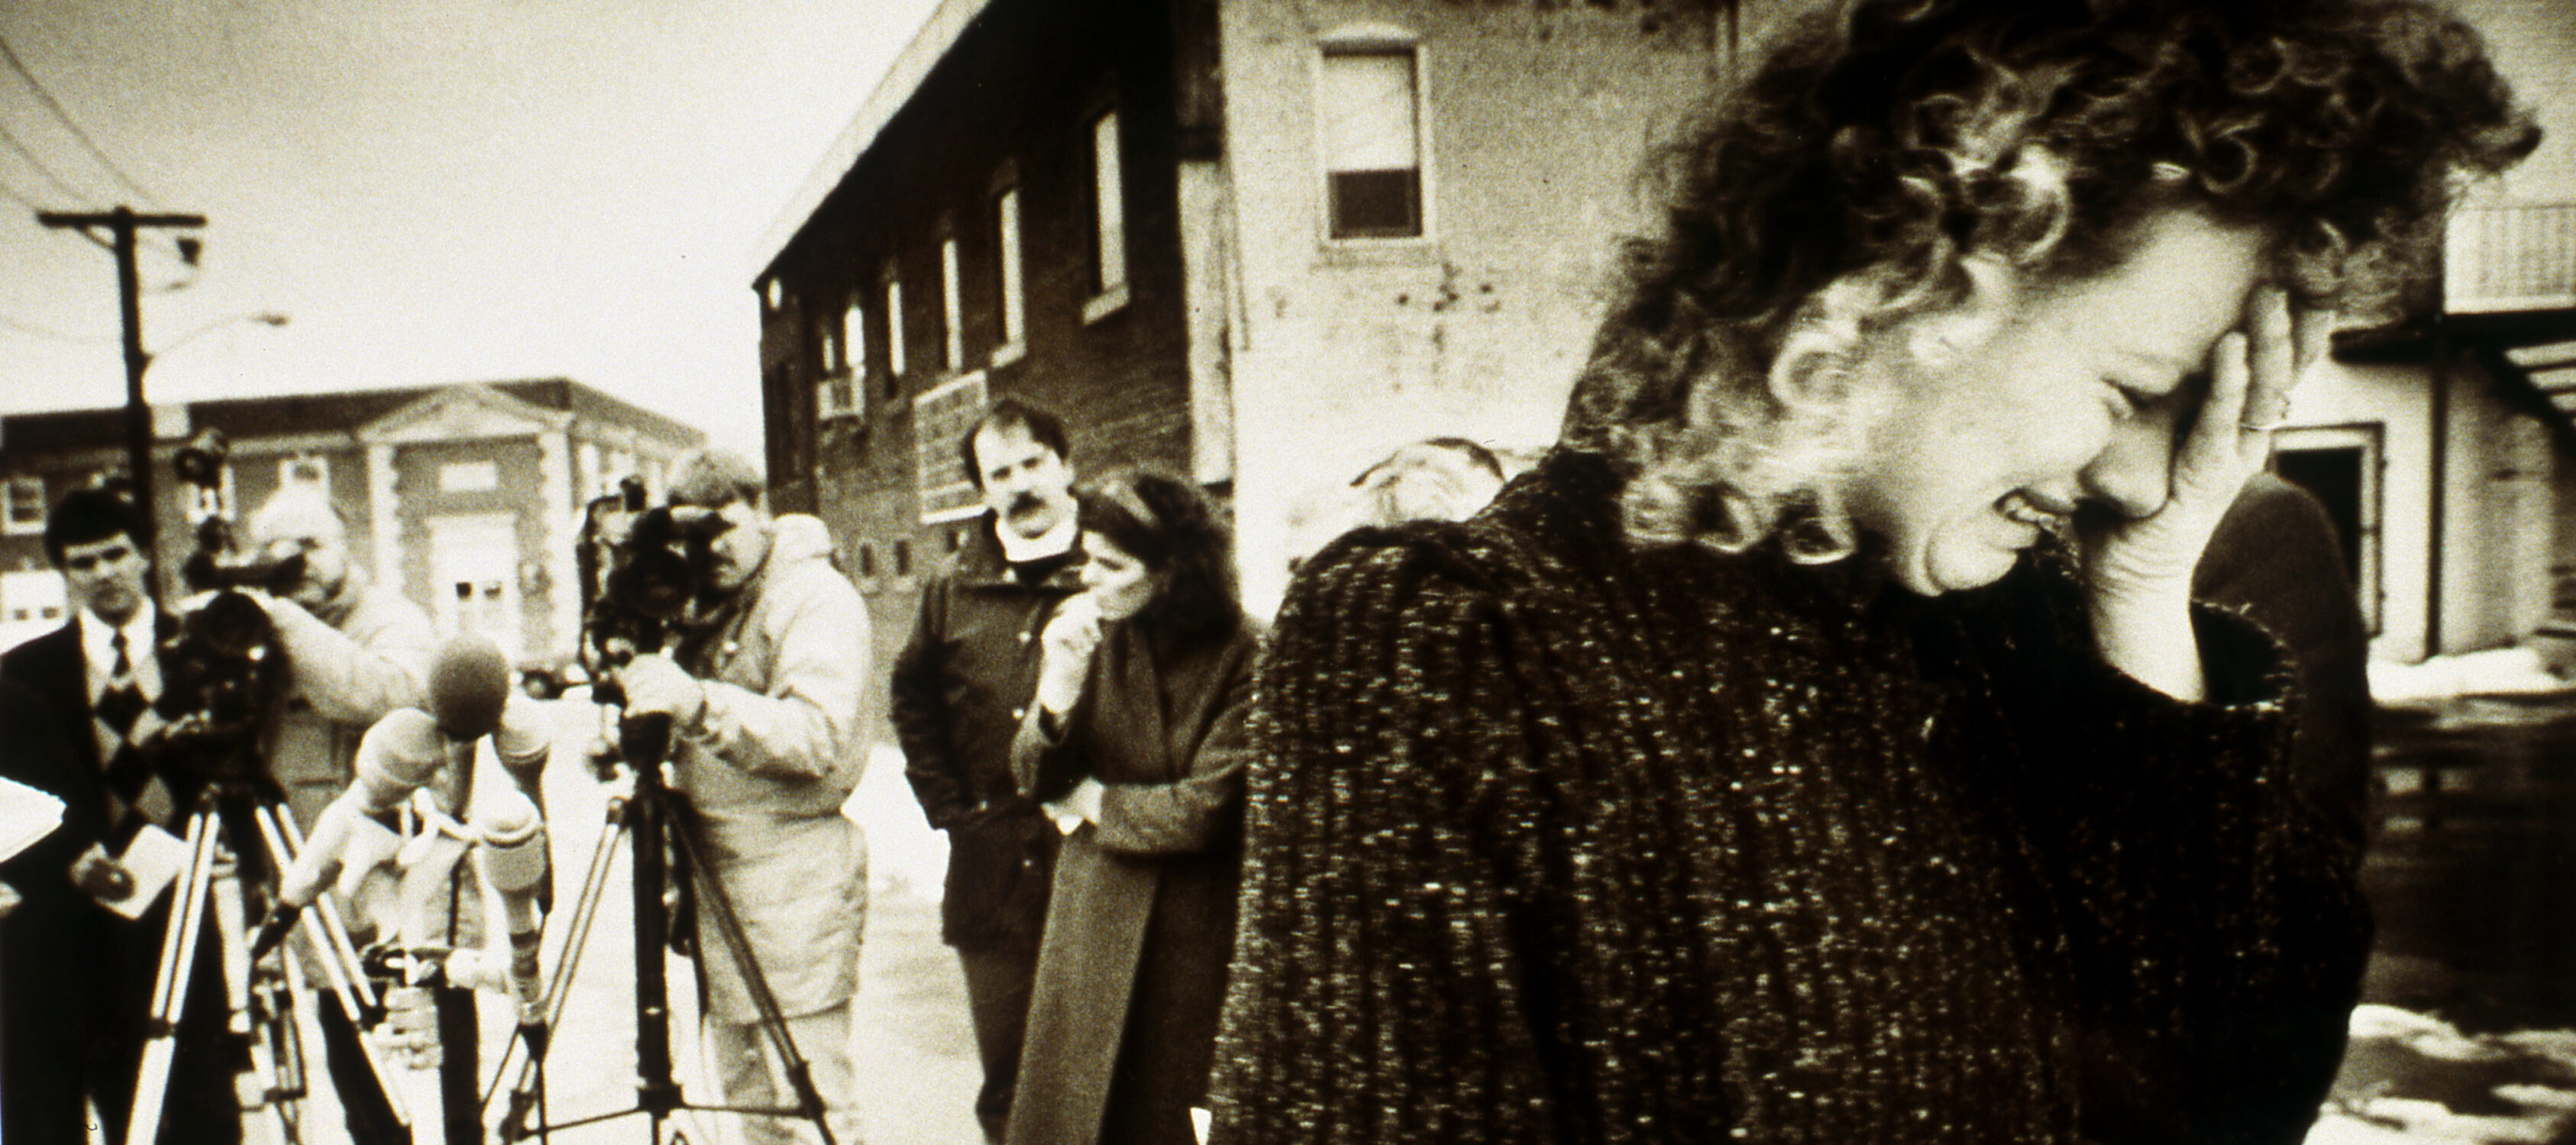 A black-and-white photograph of a light-skinned adult with curly hair crying into their hand. They wear a sweater and stand in the foreground, seen waist up, while several photographers swarm in the background behind a microphone stand set up in the middle of the street.